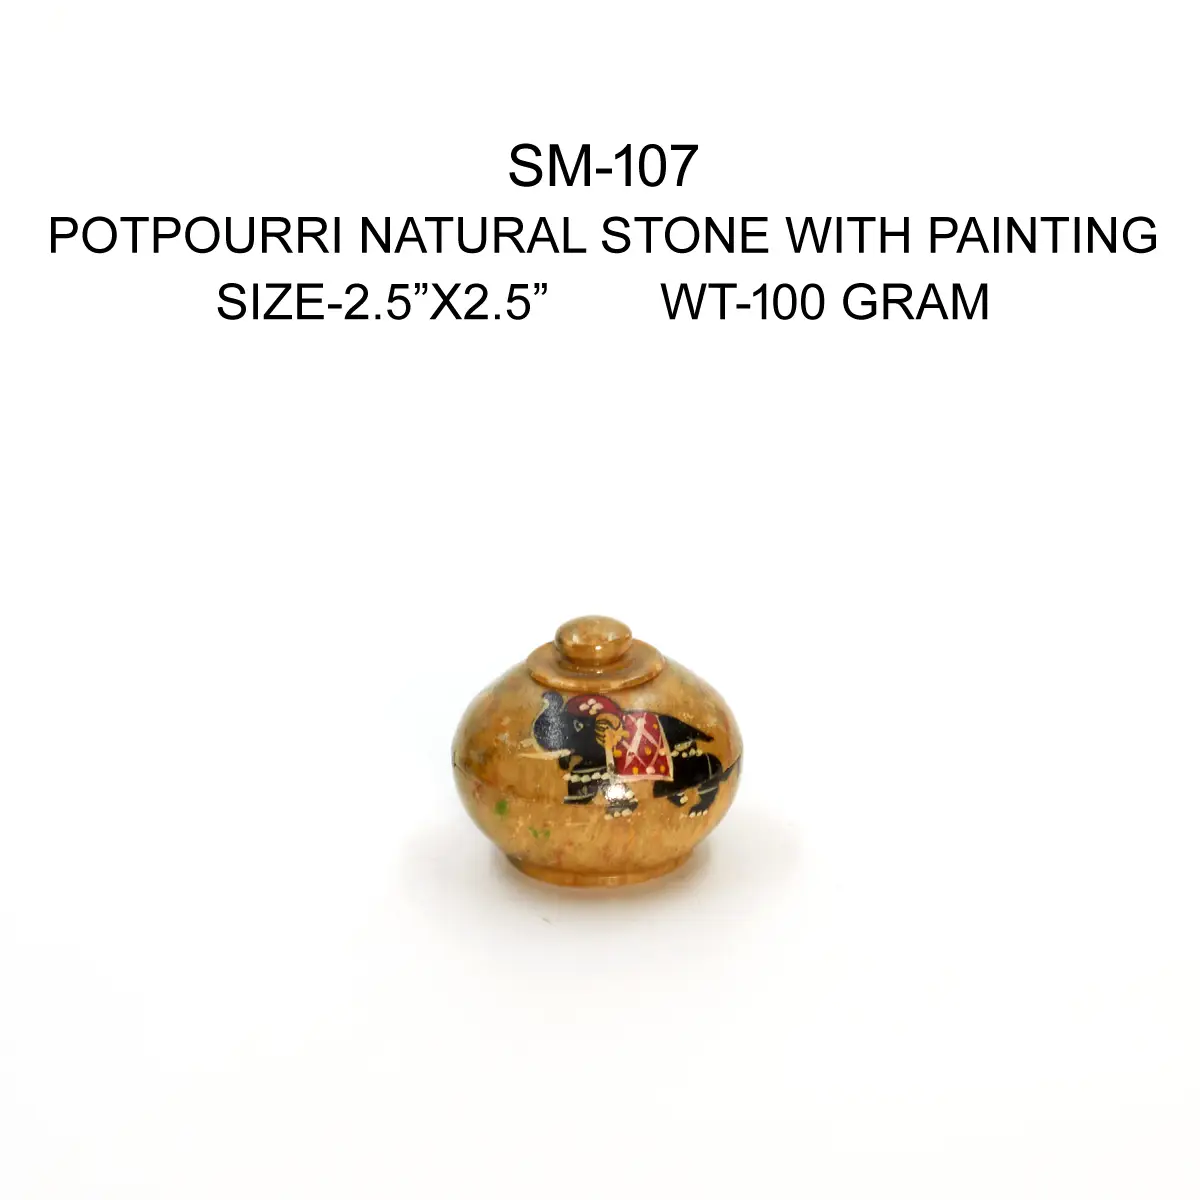 POTPOURRI NATURAL STONE WITH PAINTING